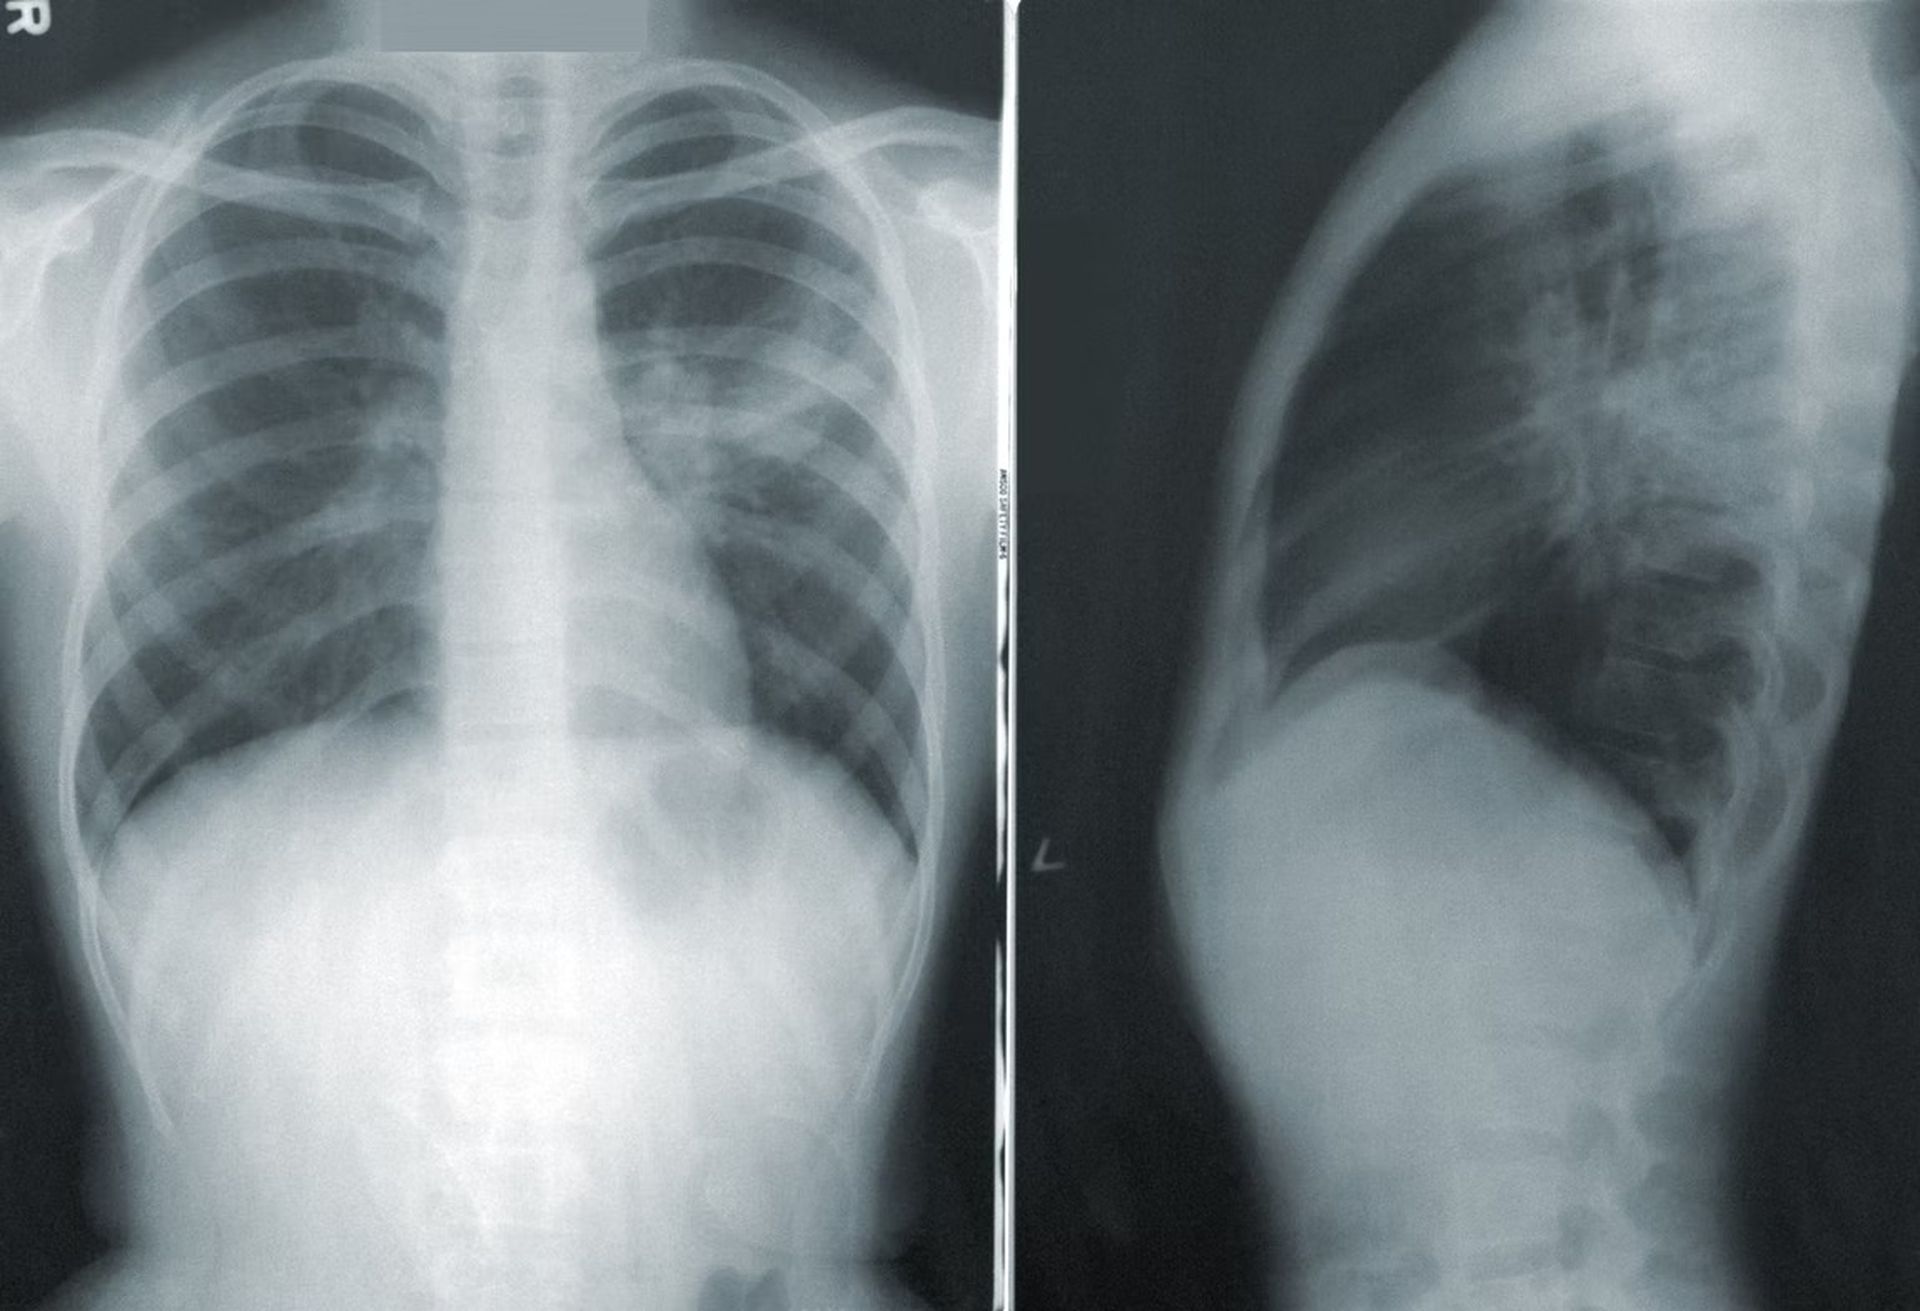 AI can tell people's race from X-rays and CT scans with 90% accuracy, the latest study shows.